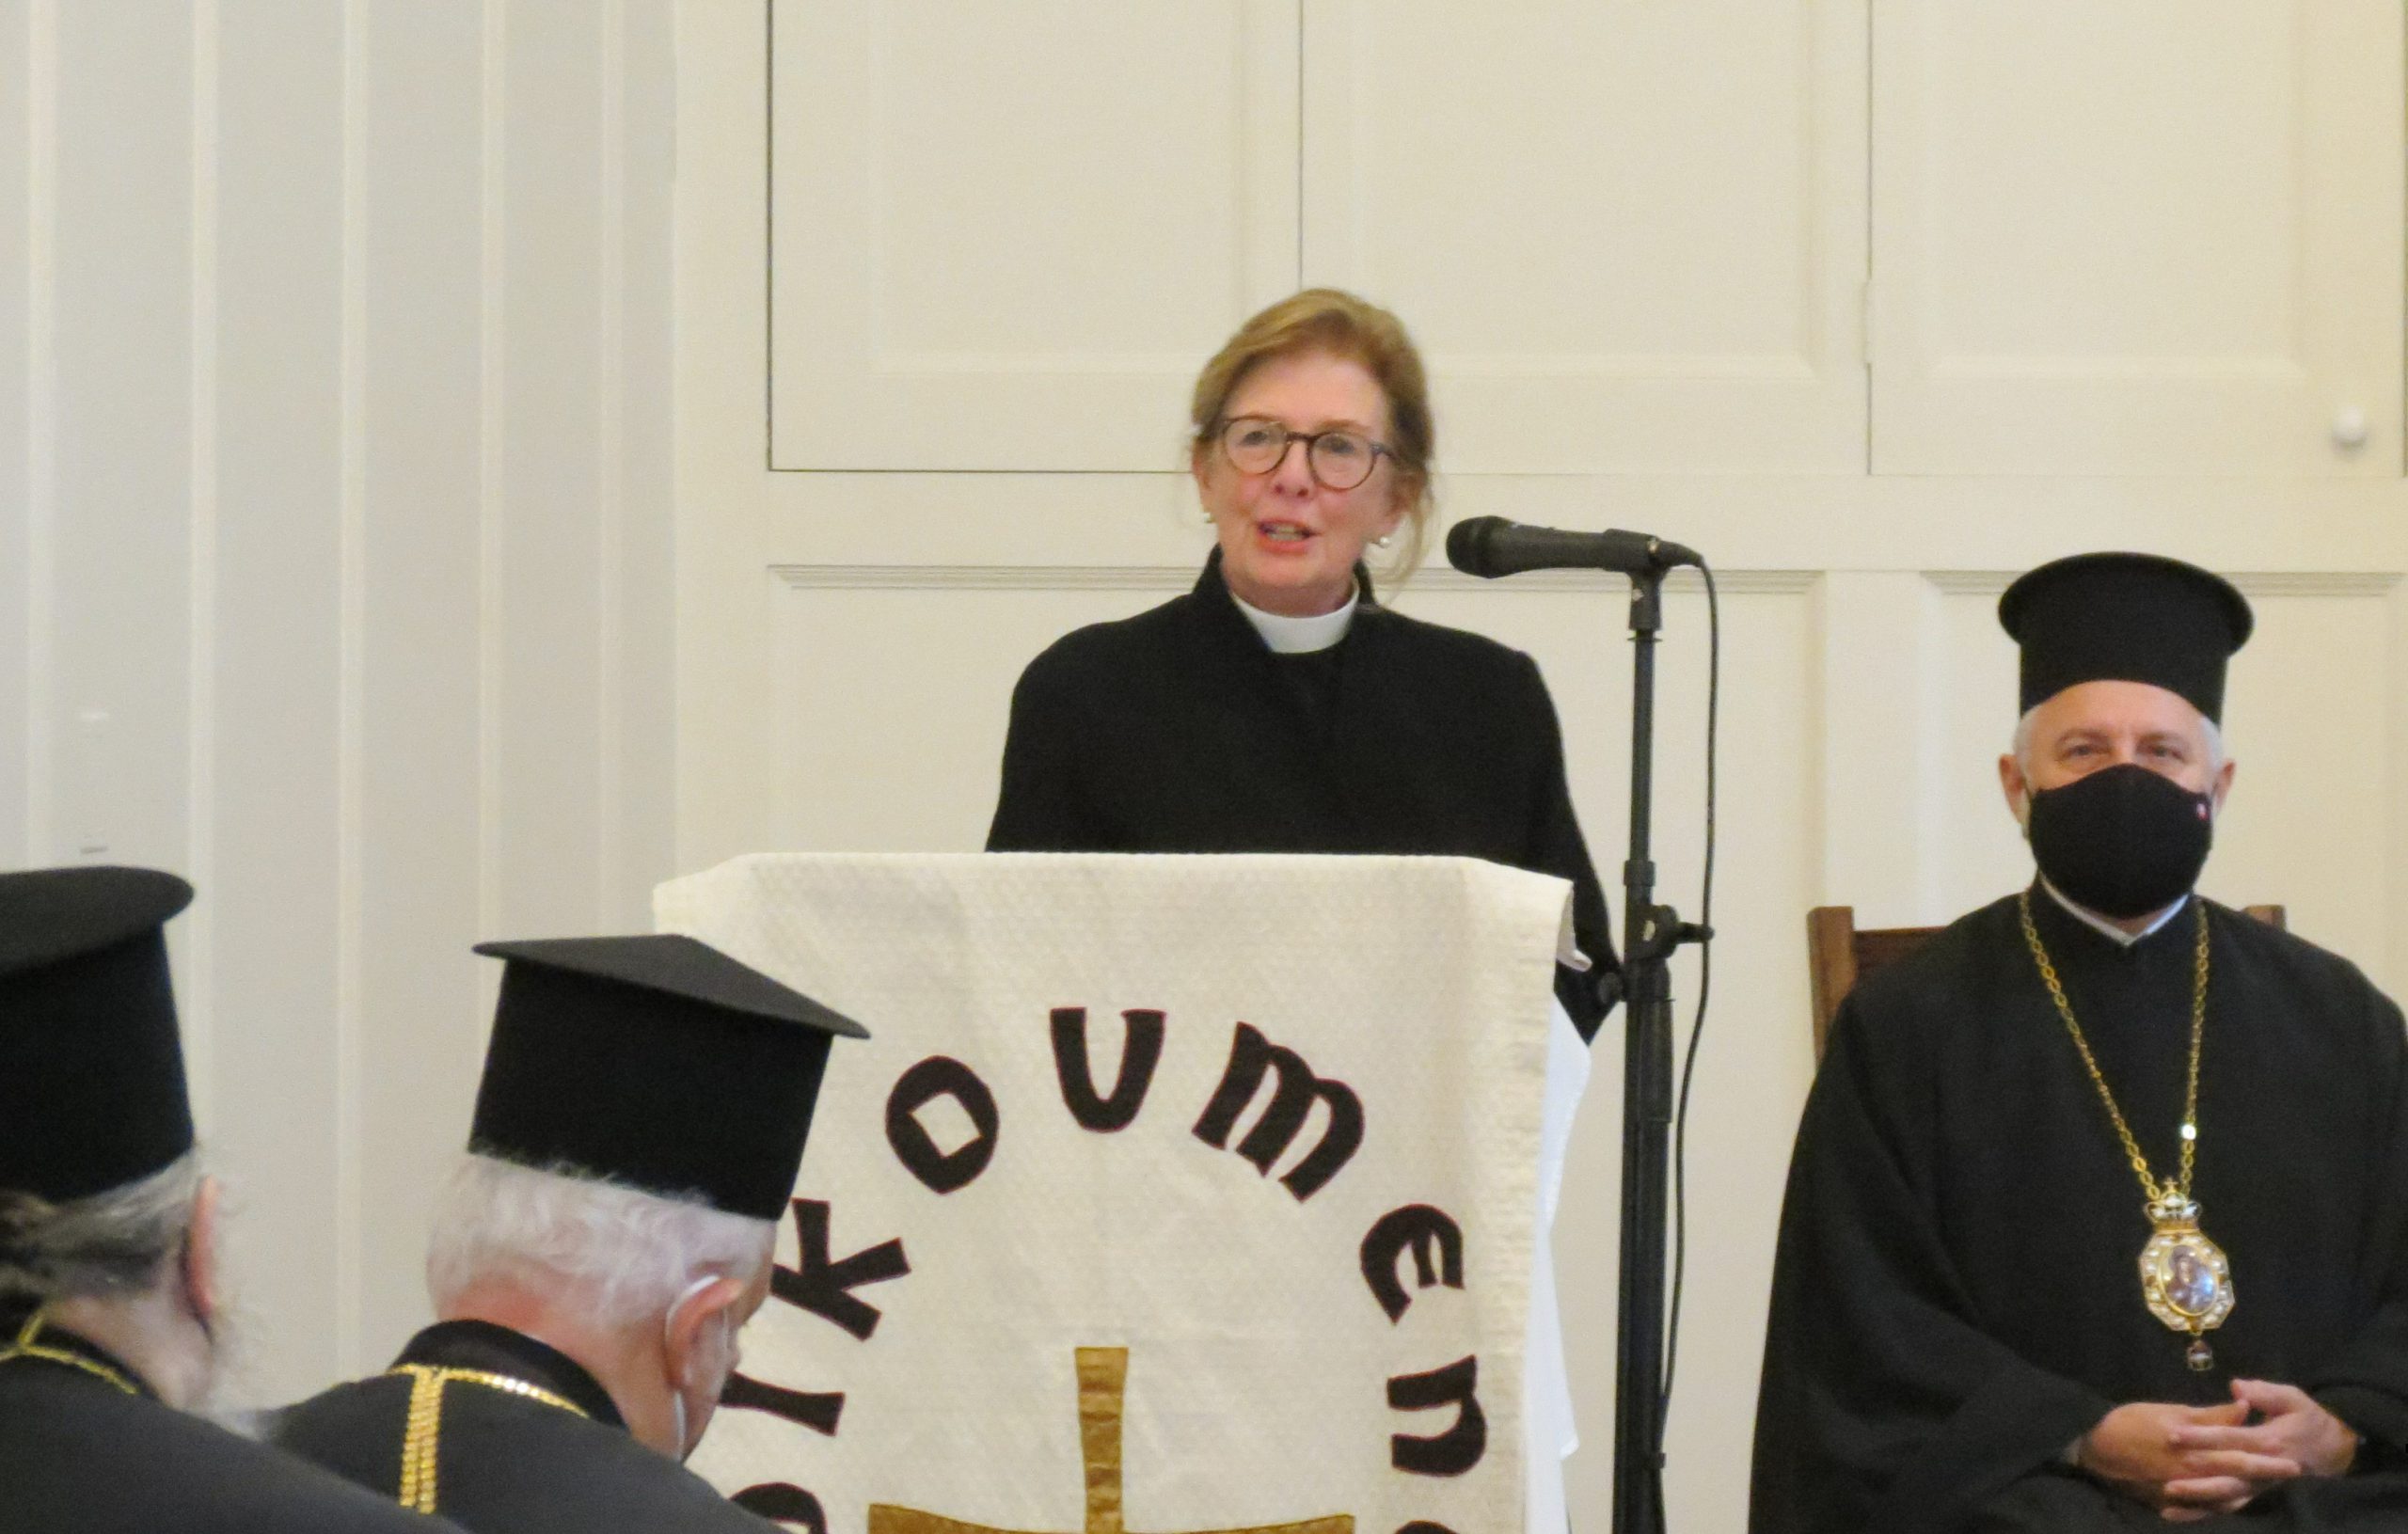 Rev. Susan Henry Crowe, General Secretary of the United Methodist Board of Church and Society